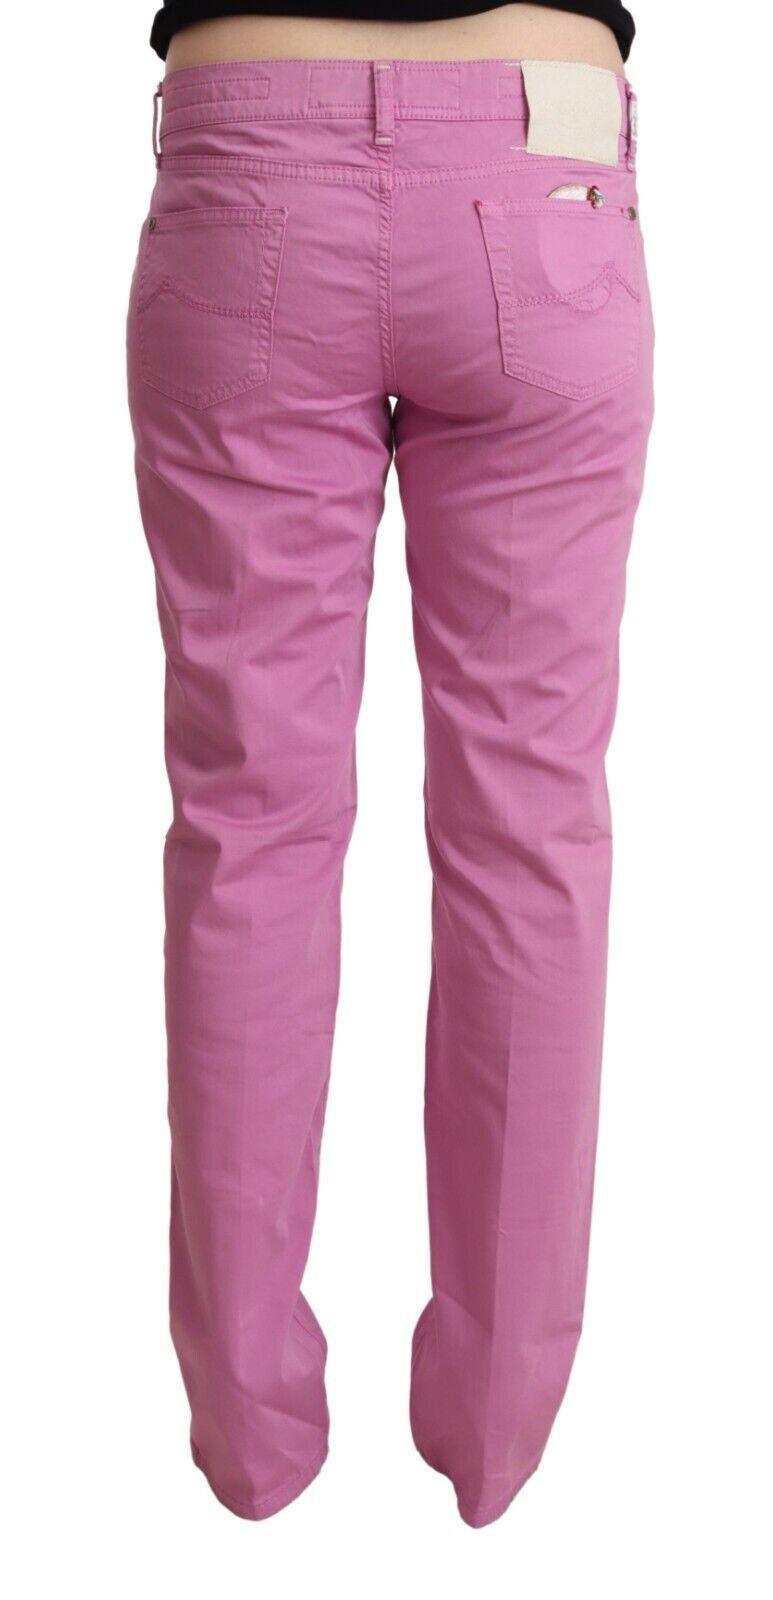 Jacob Cohen Women's Pink Cotton Low Waist Denim Tapered Jeans - Designed by Jacob Cohen Available to Buy at a Discounted Price on Moon Behind The Hill Online Designer Discount Store